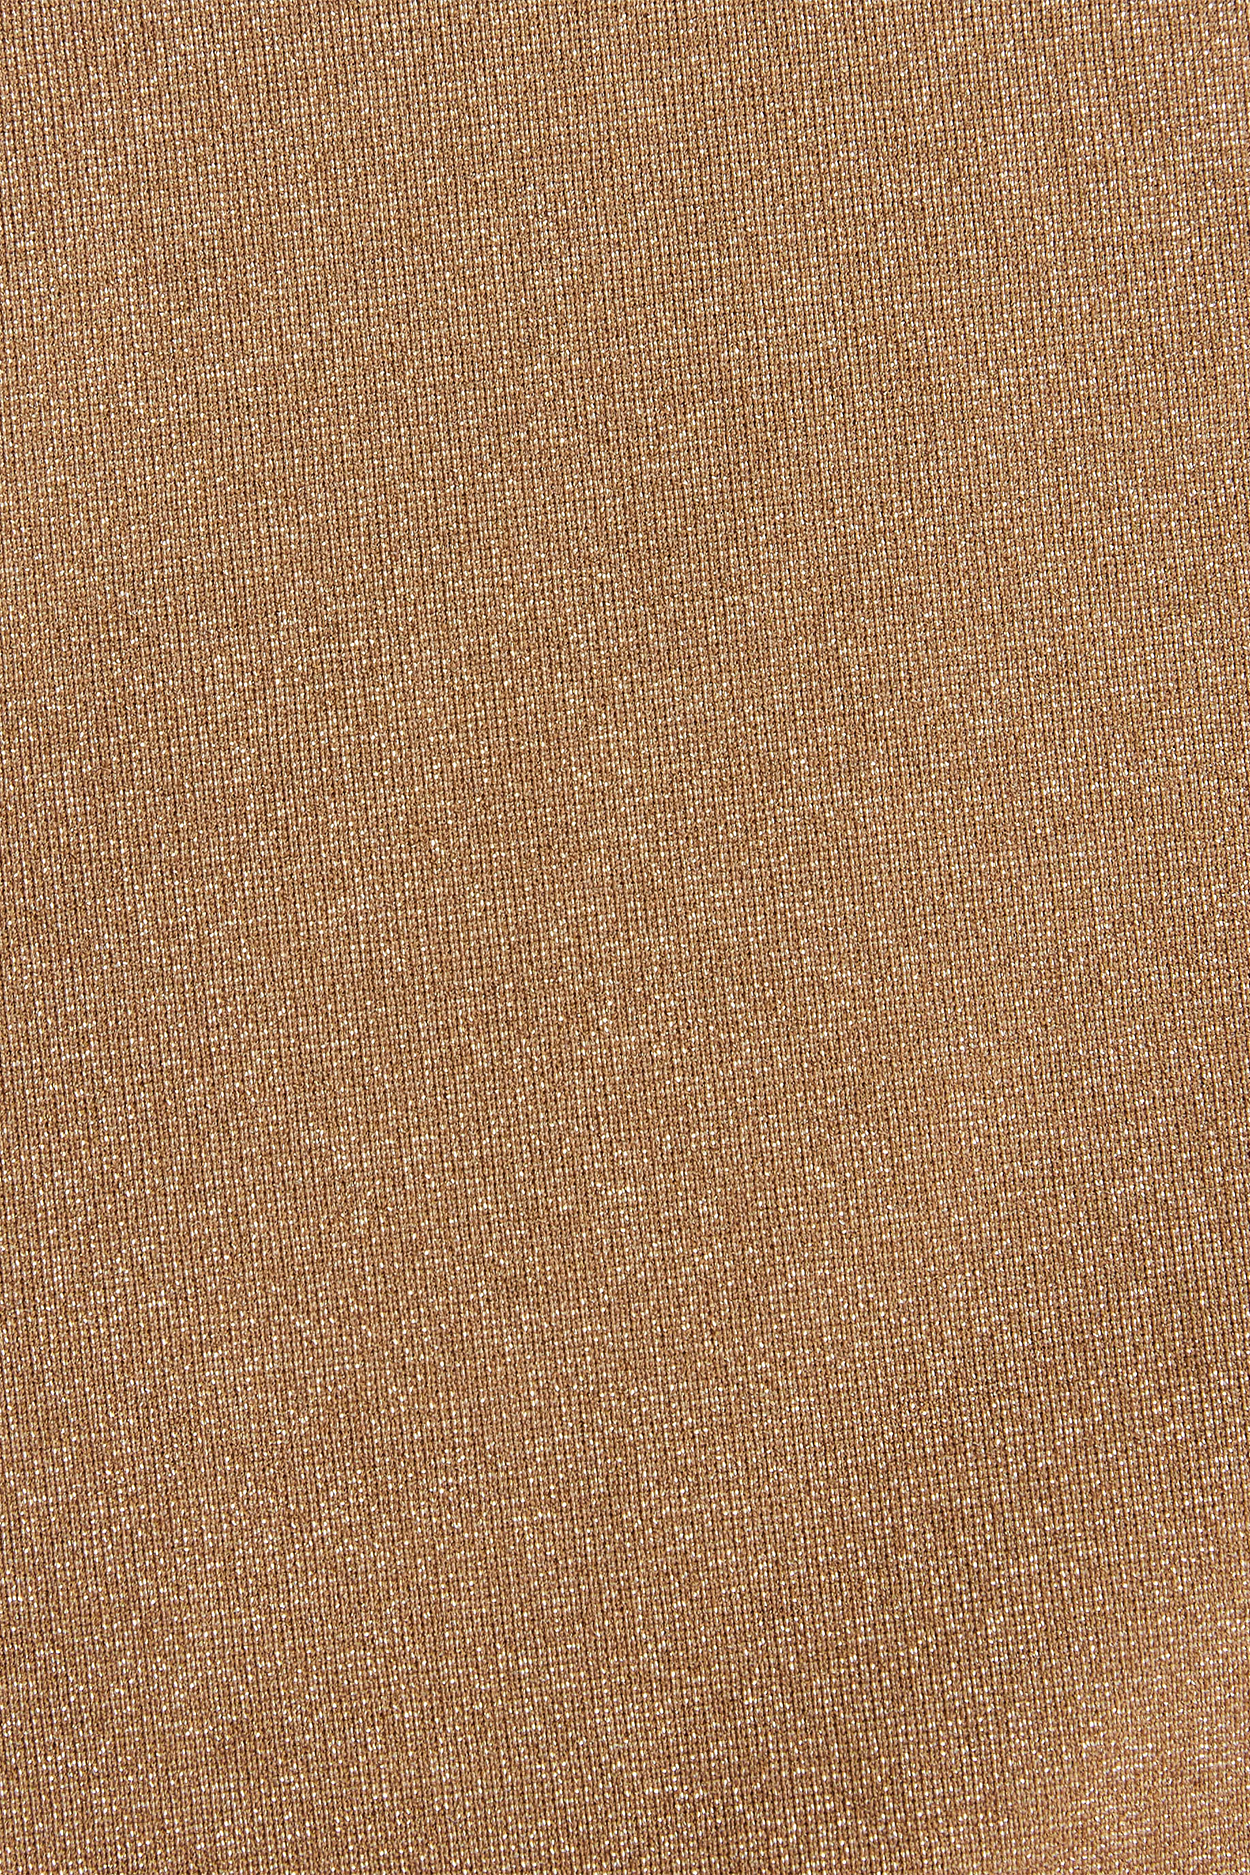 Neutra Hipster - Golden Glow Metallic Color Texture for Fabric